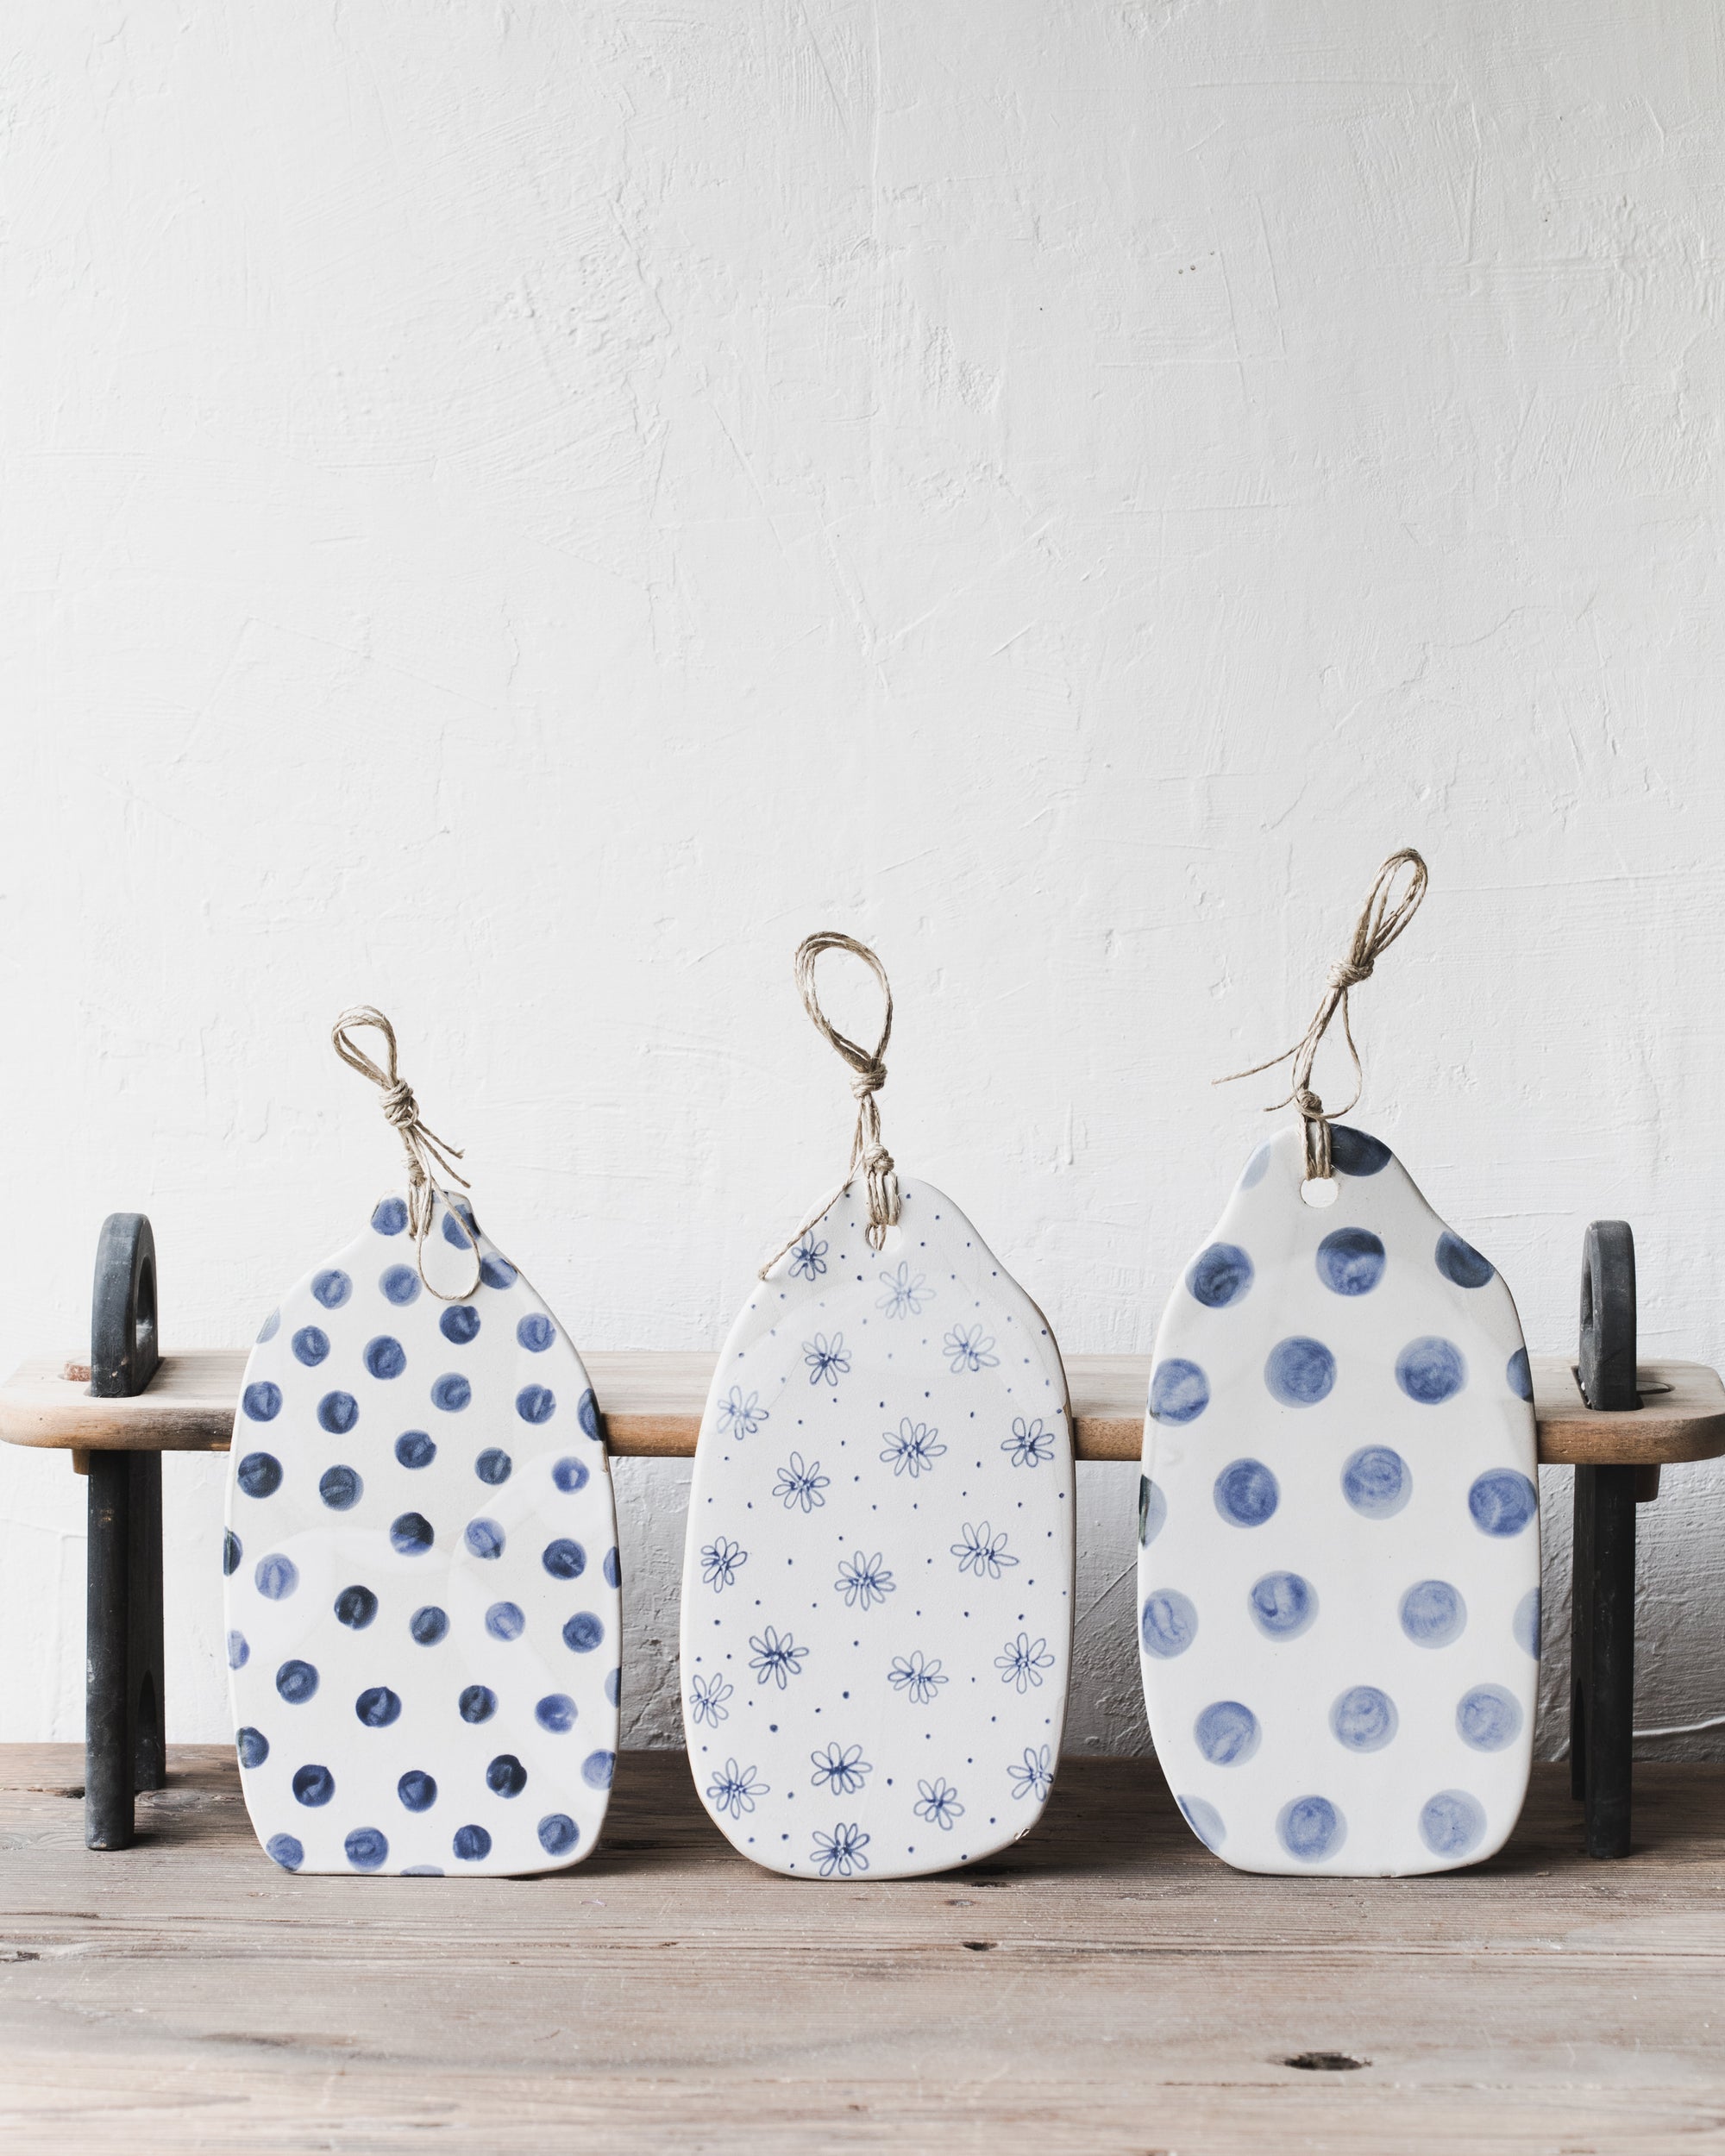 Rustic Blue and white patterned cheeseboards with hemp cord handmade by Clay Beehive ceramics